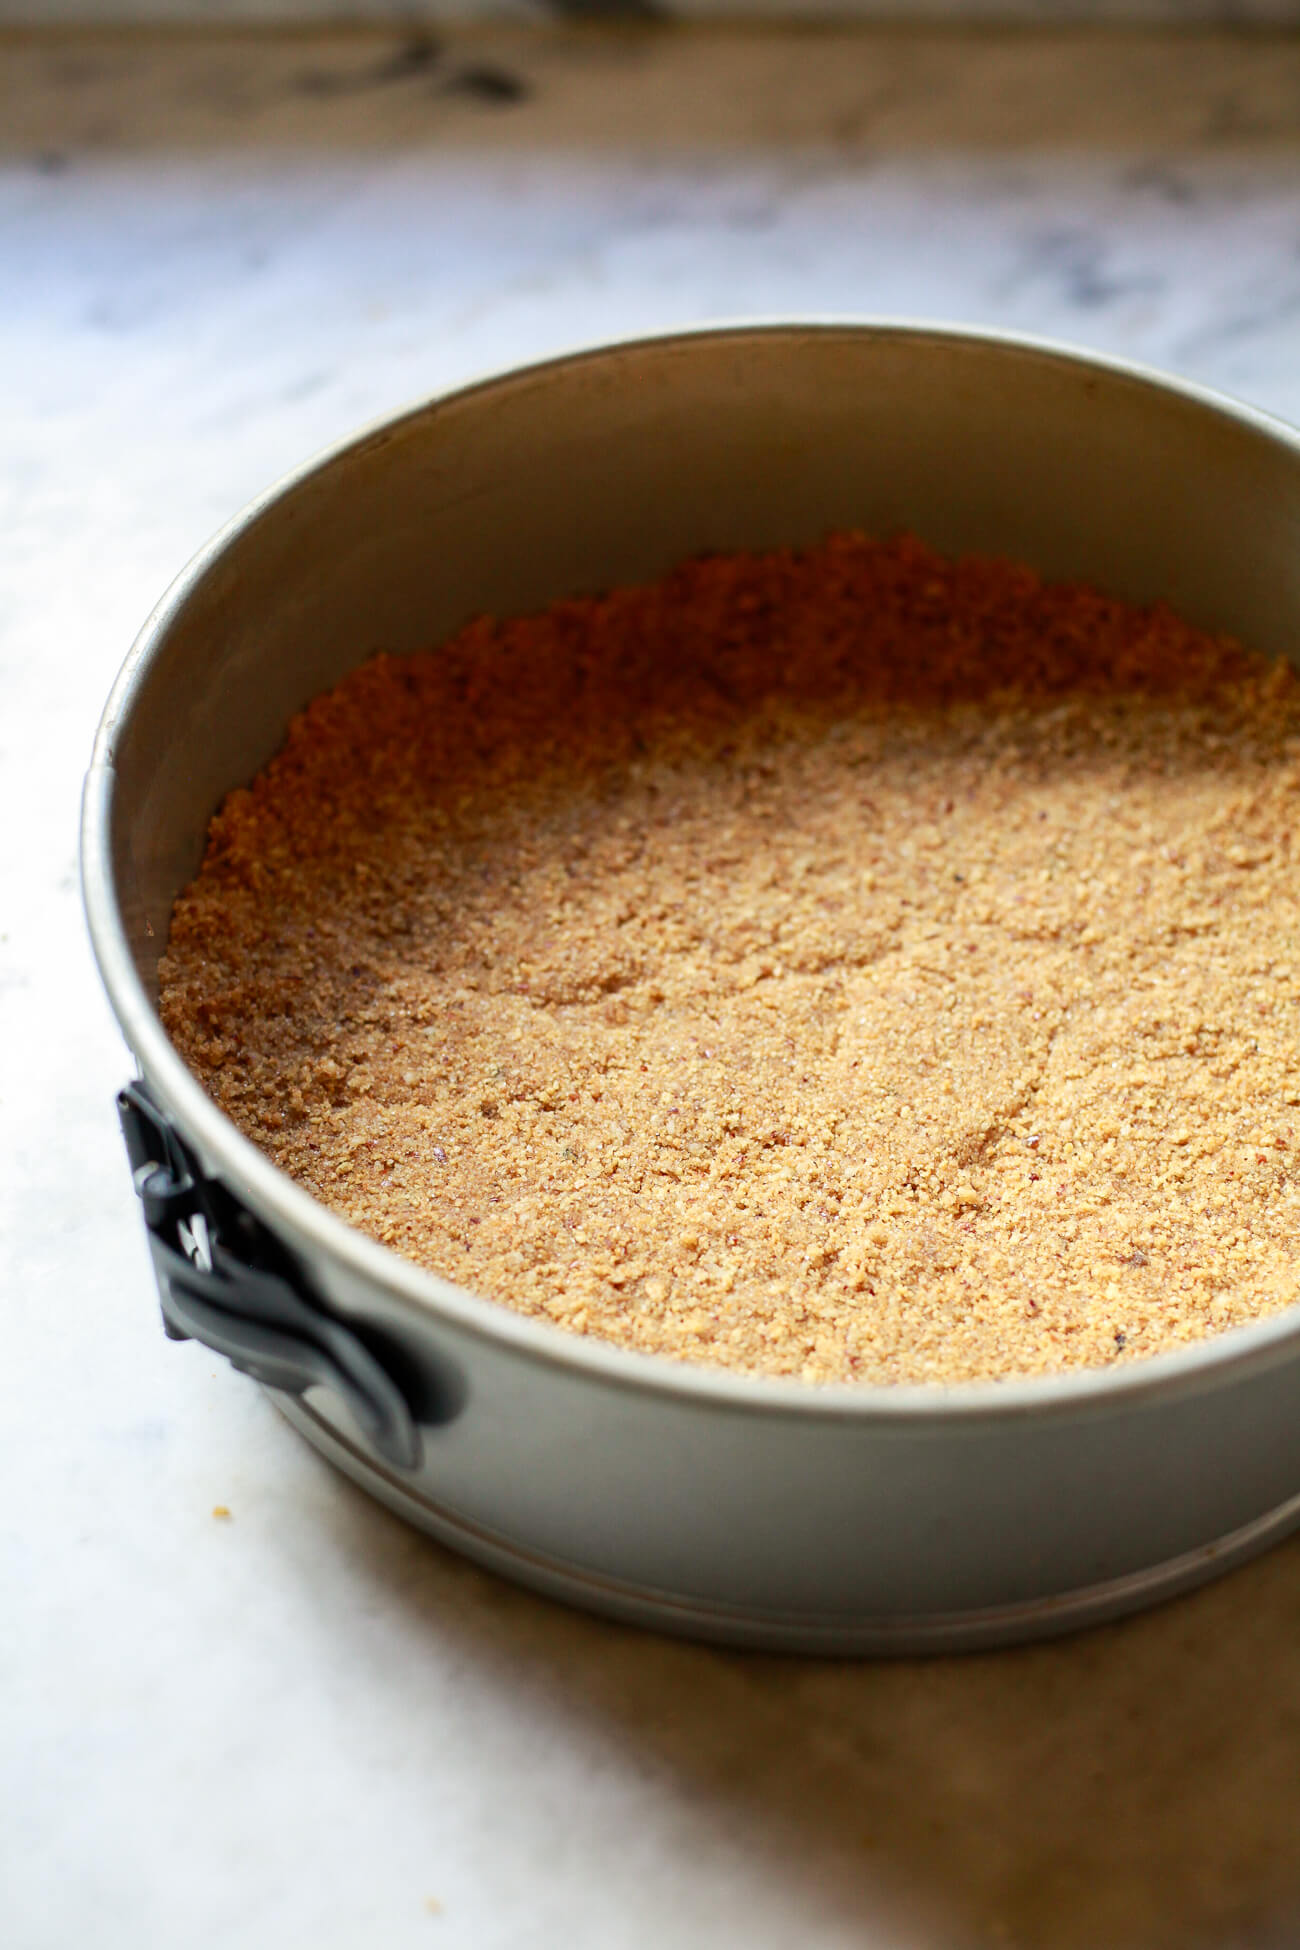 A graham cracker and pecan crust in the a springform pan to make a pumpkin cheesecake.